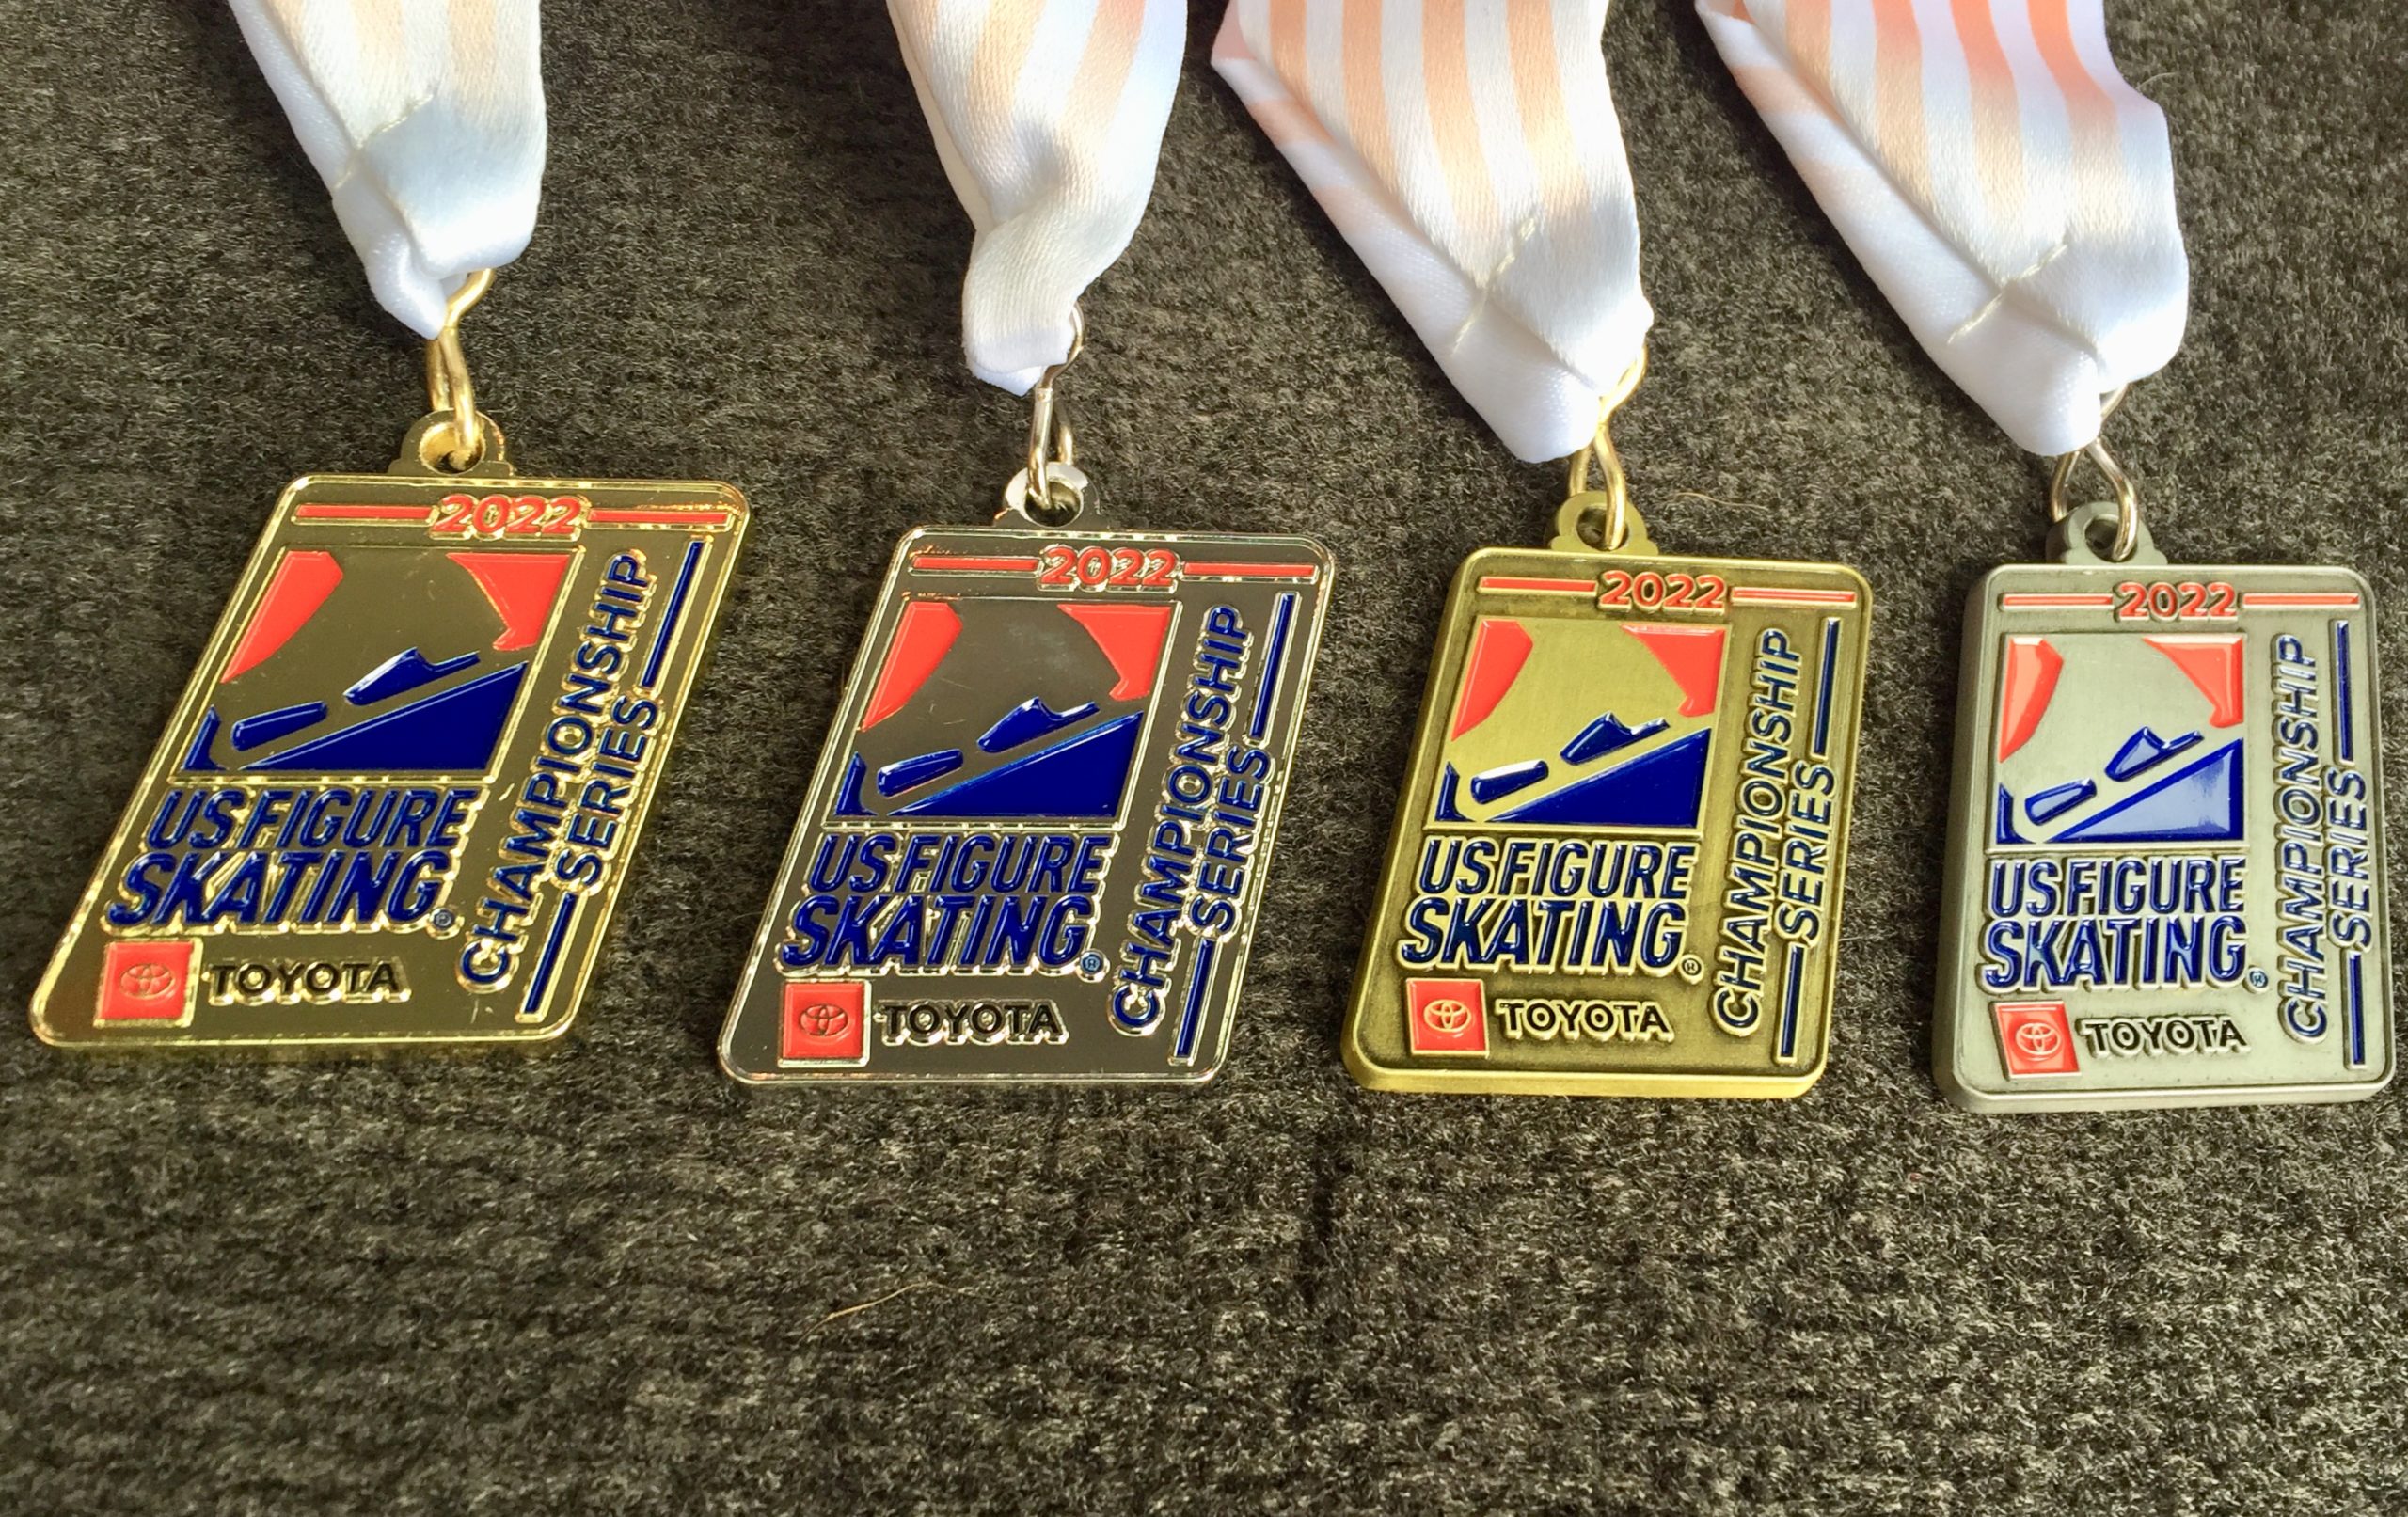 Championship Series Medals